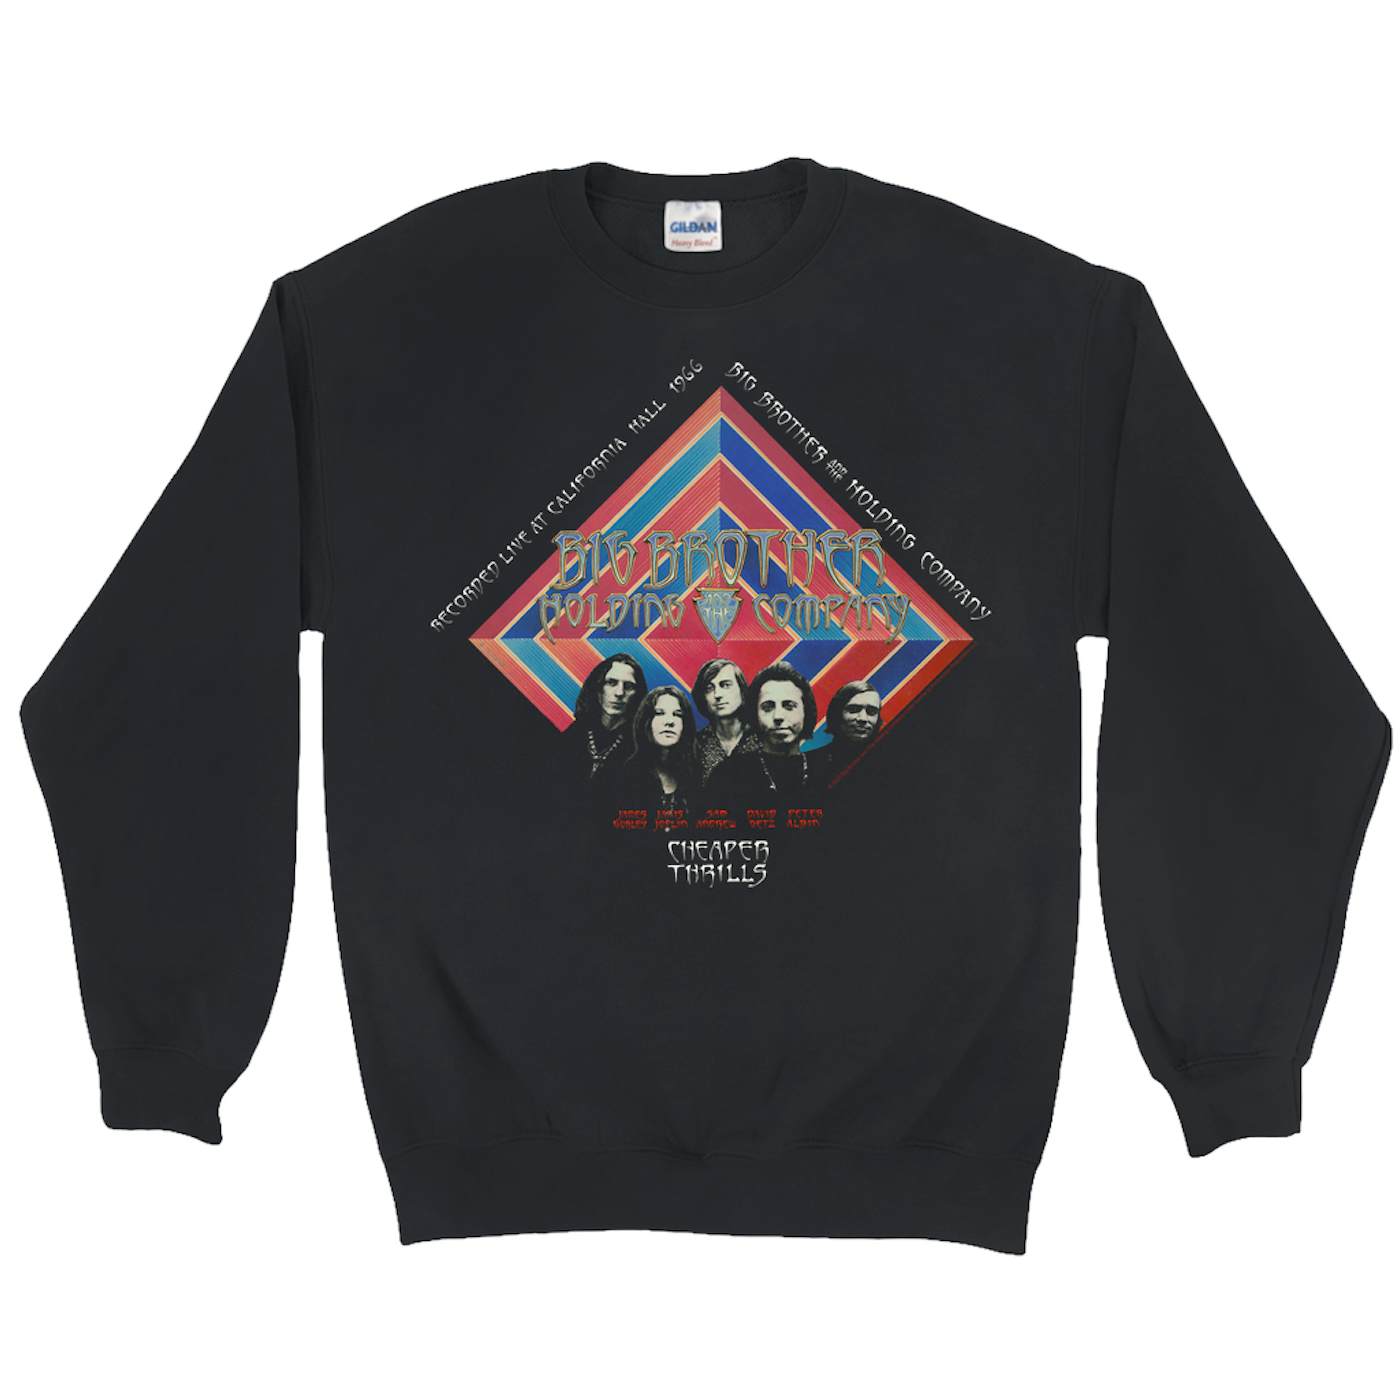 Big Brother & The Holding Company Big Brother and The Holding Co. Sweatshirt | Cheaper Thrills Album Cover Big Brother and The Holding Co. Sweatshirt